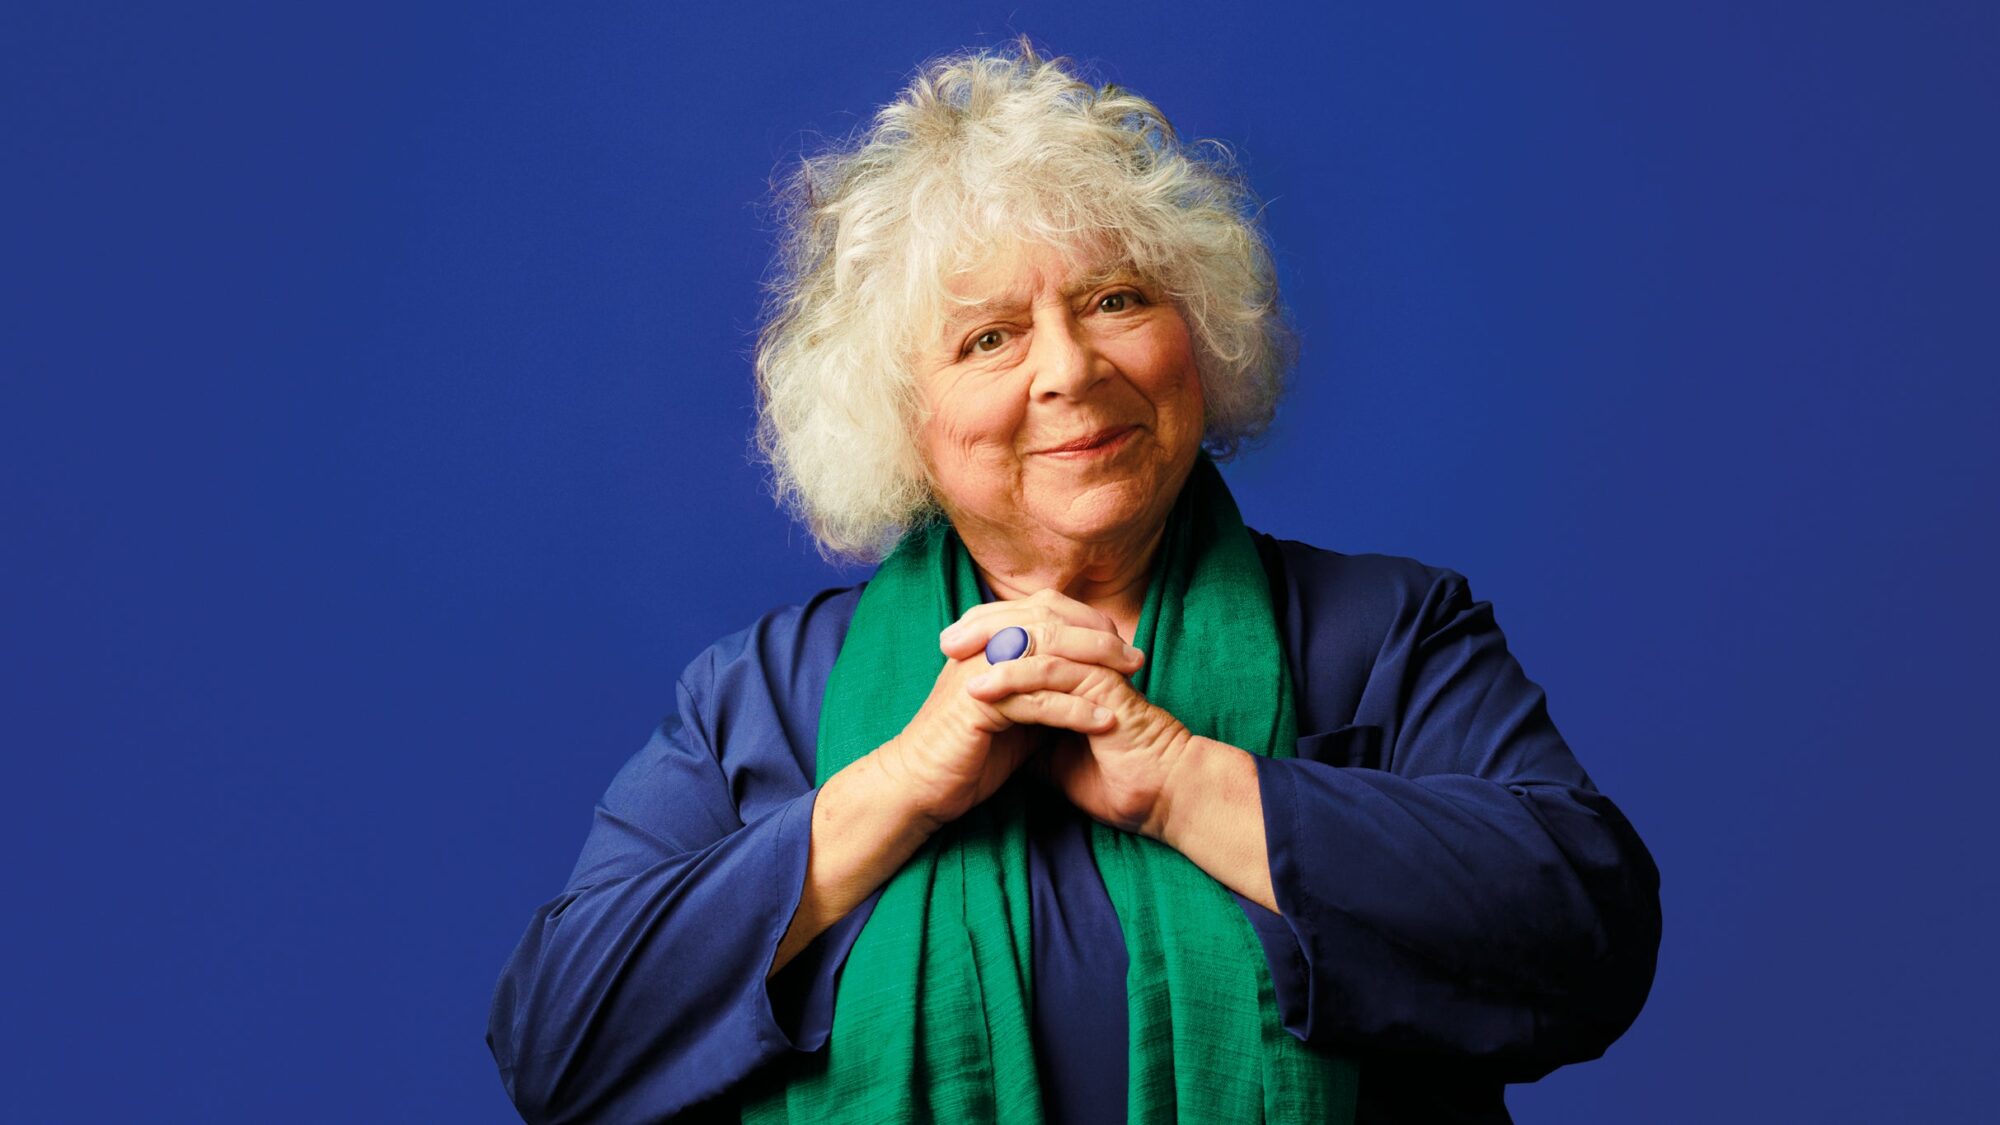 Image name Miriam Margolyes at York Barbican York the 1 image from the post Miriam Margolyes: Oh Miriam! Live at Sheffield City Hall Oval Hall, Sheffield in Yorkshire.com.